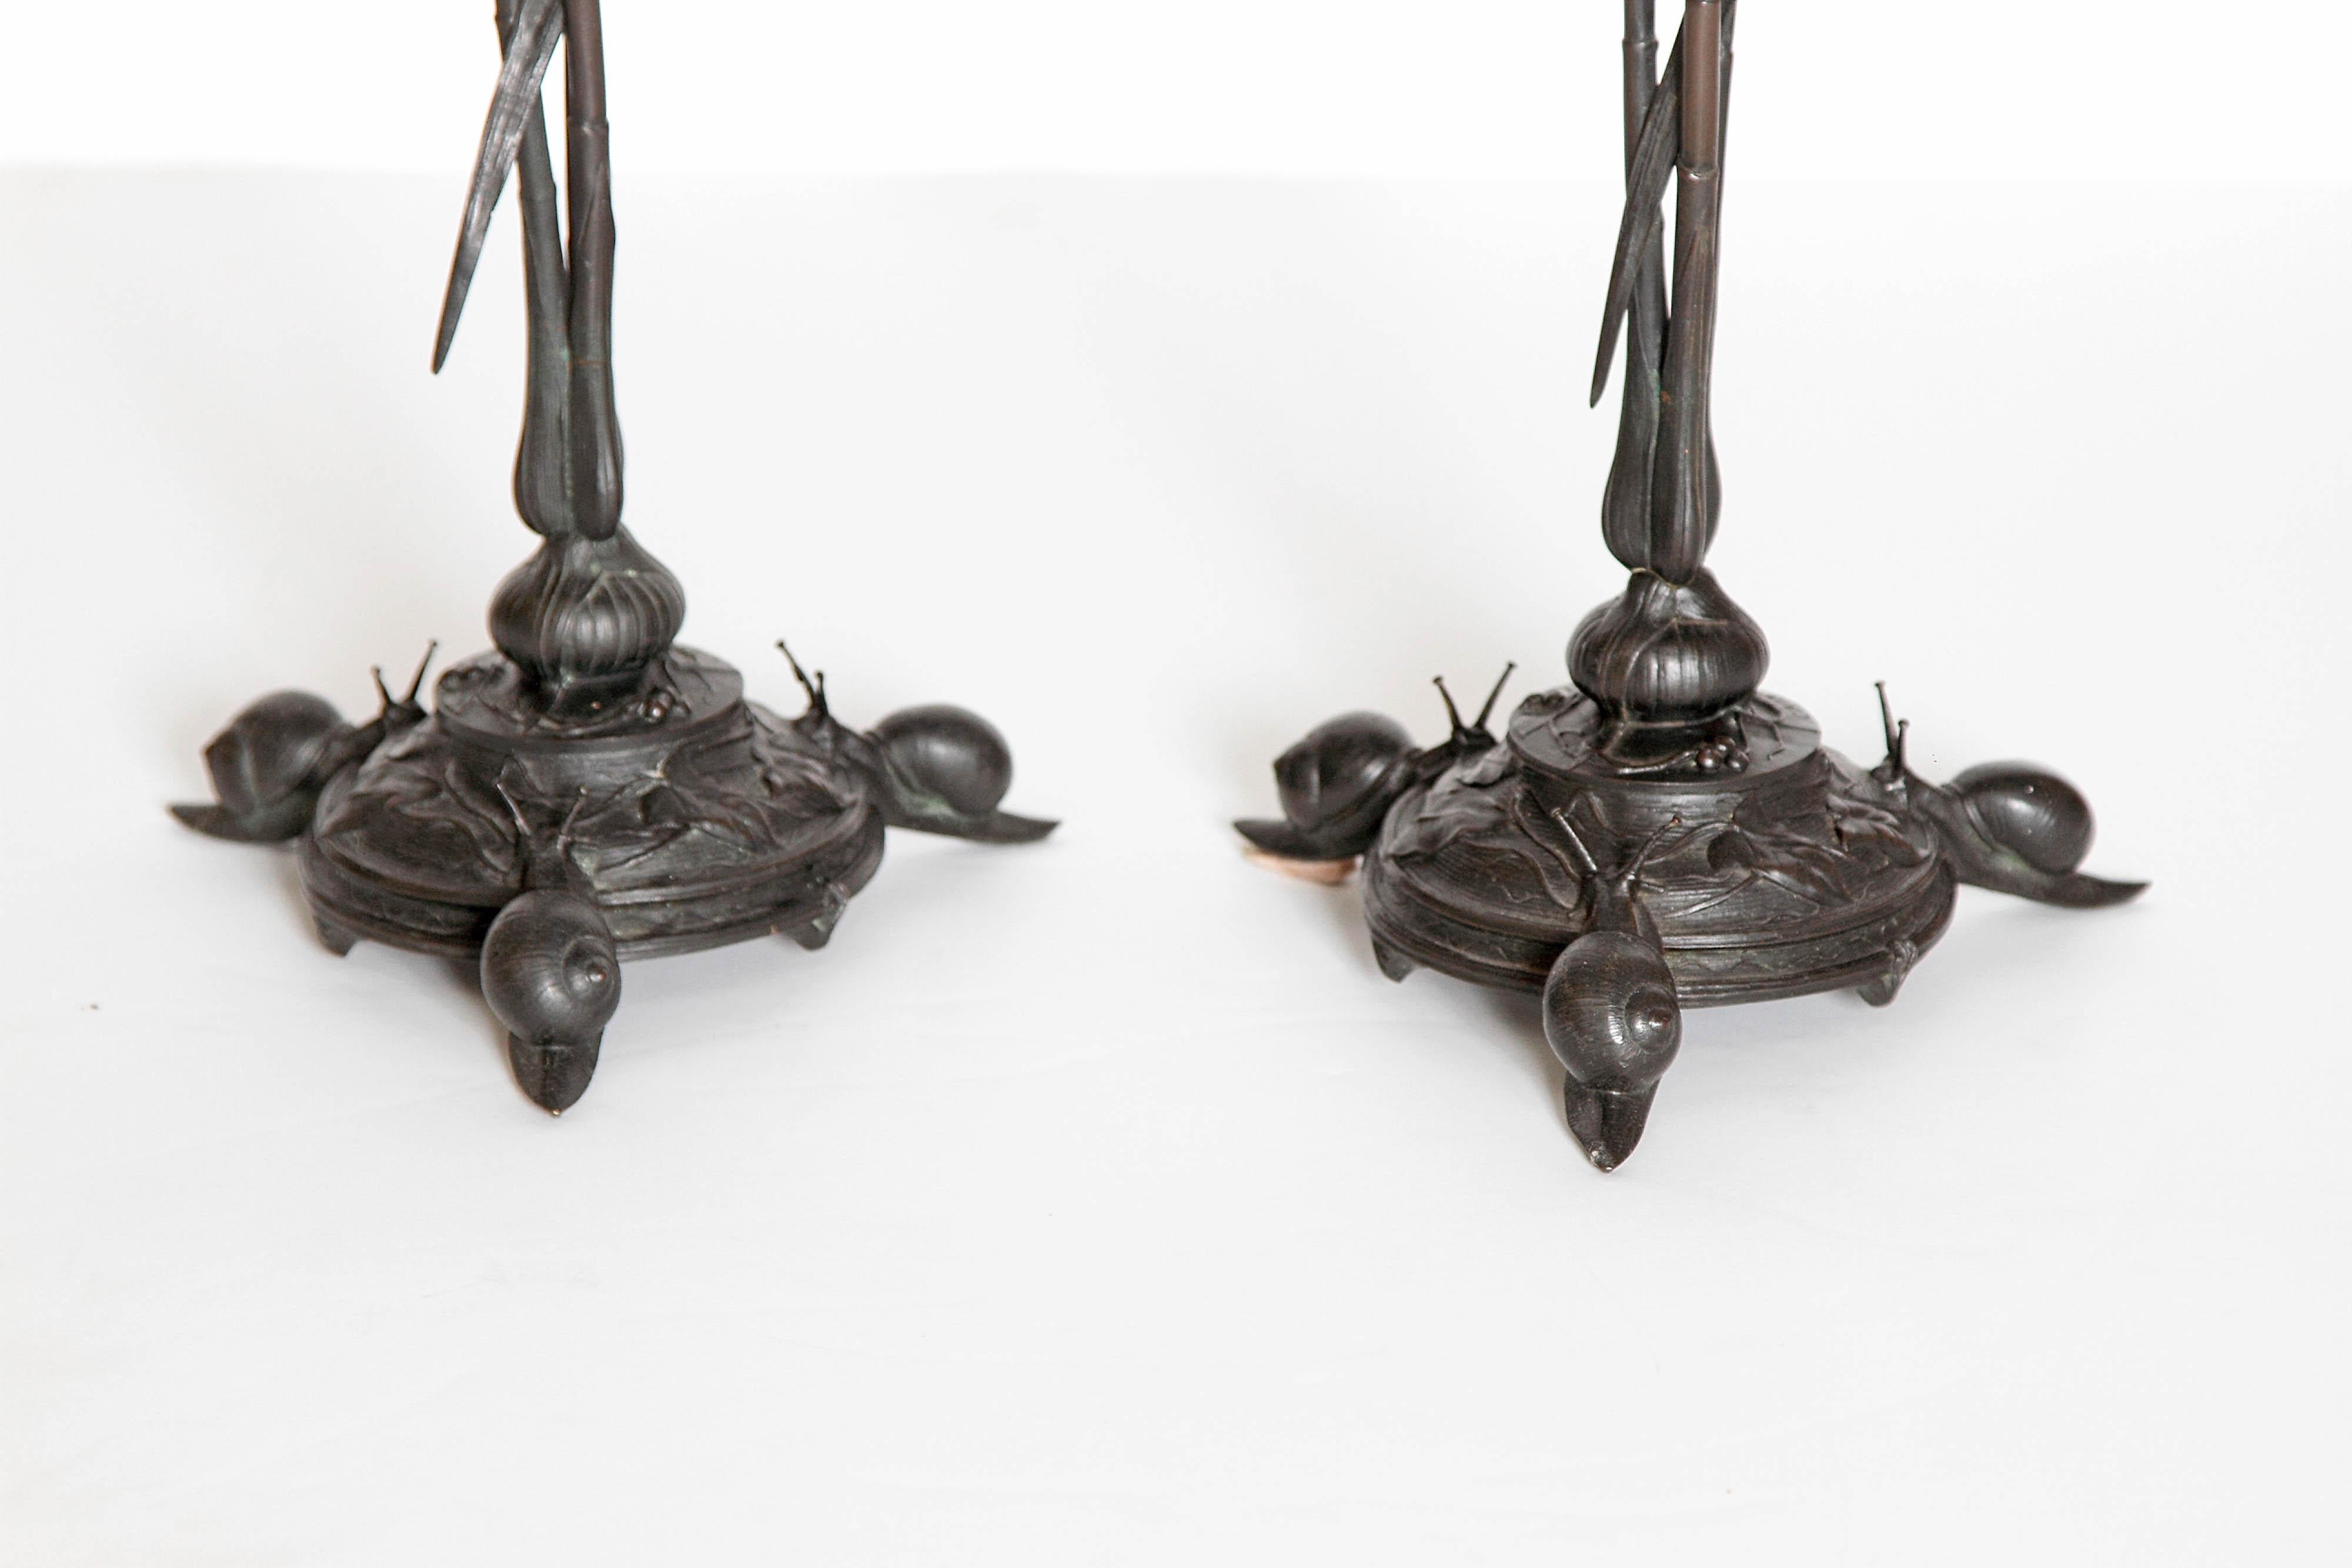 Auguste-Nicolas Cain, Pair of French Candelabra with Bird's Nest 5